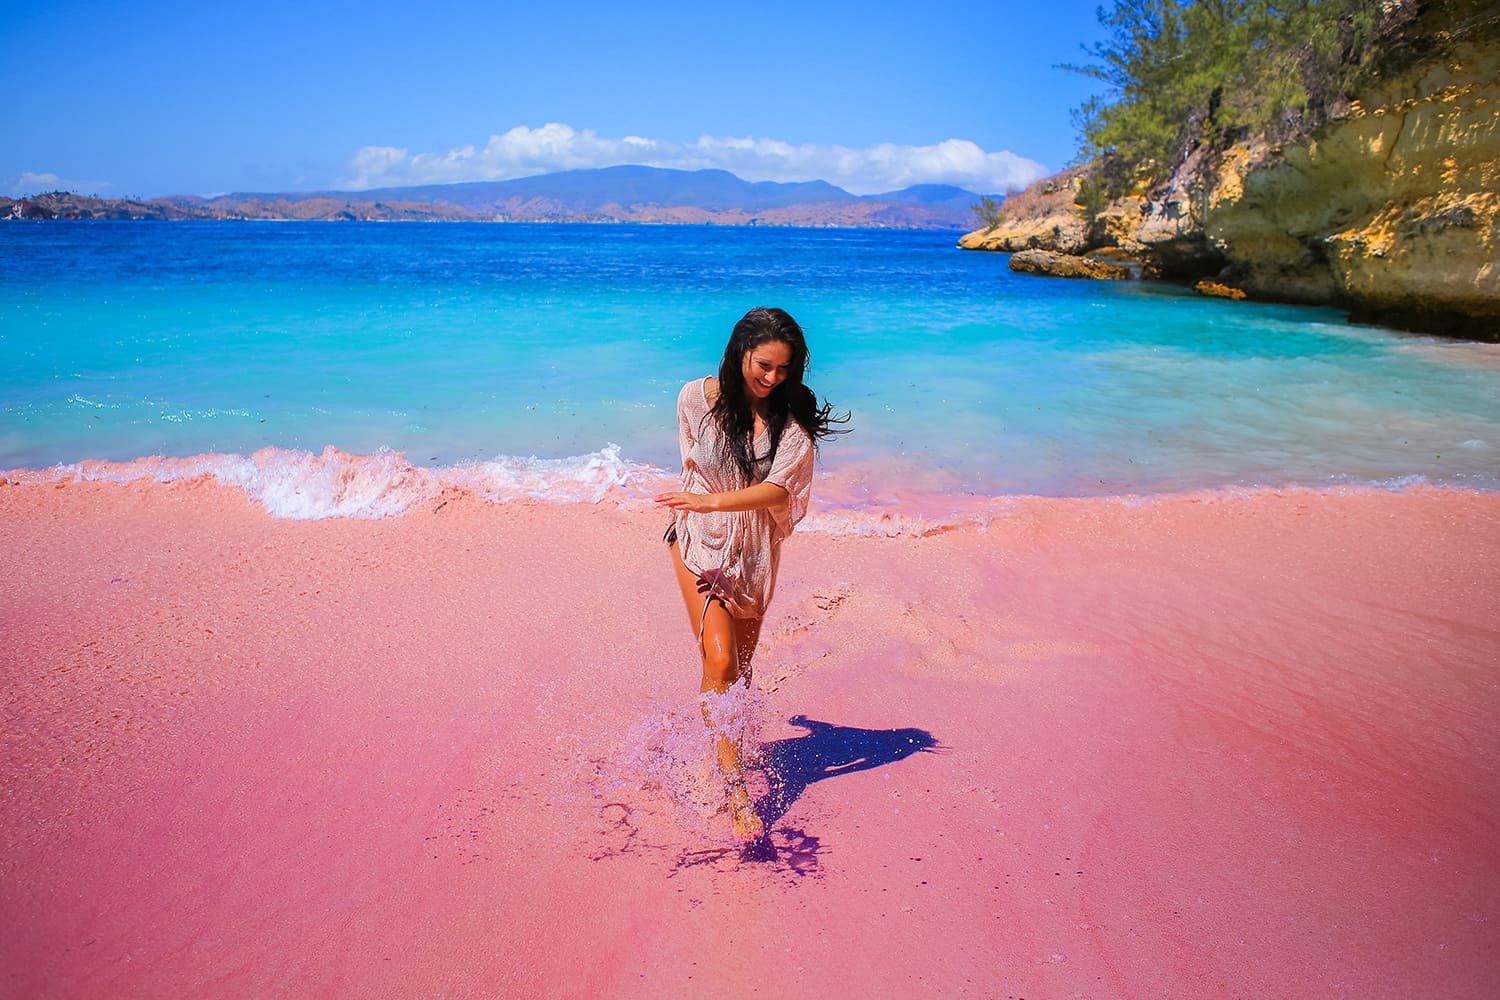 Serai Beach is one of only eight pink beaches in the world